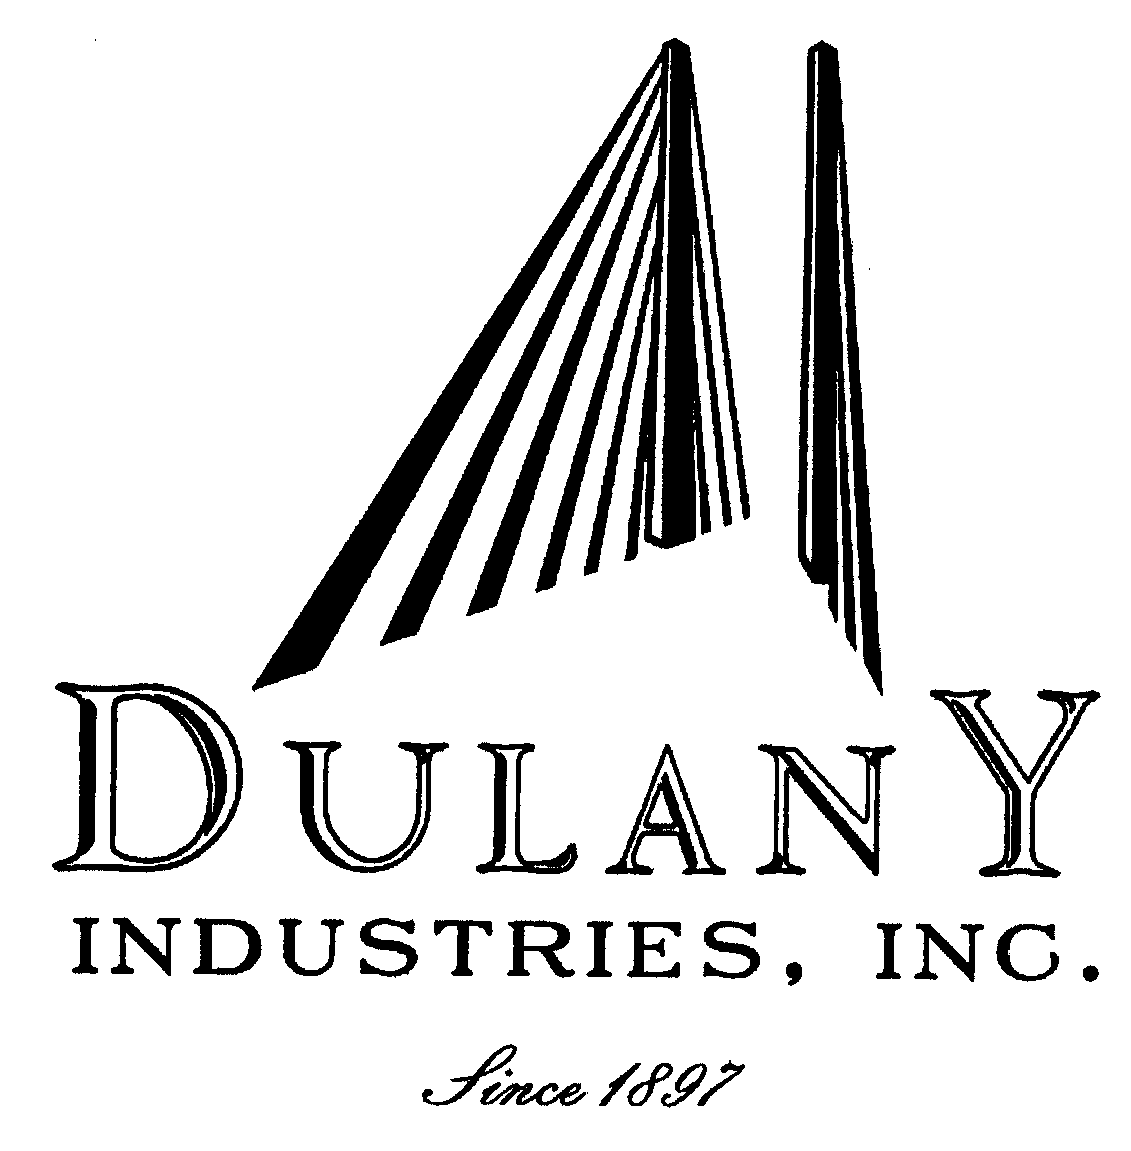  DULANY INDUSTRIES, INC. SINCE 1897